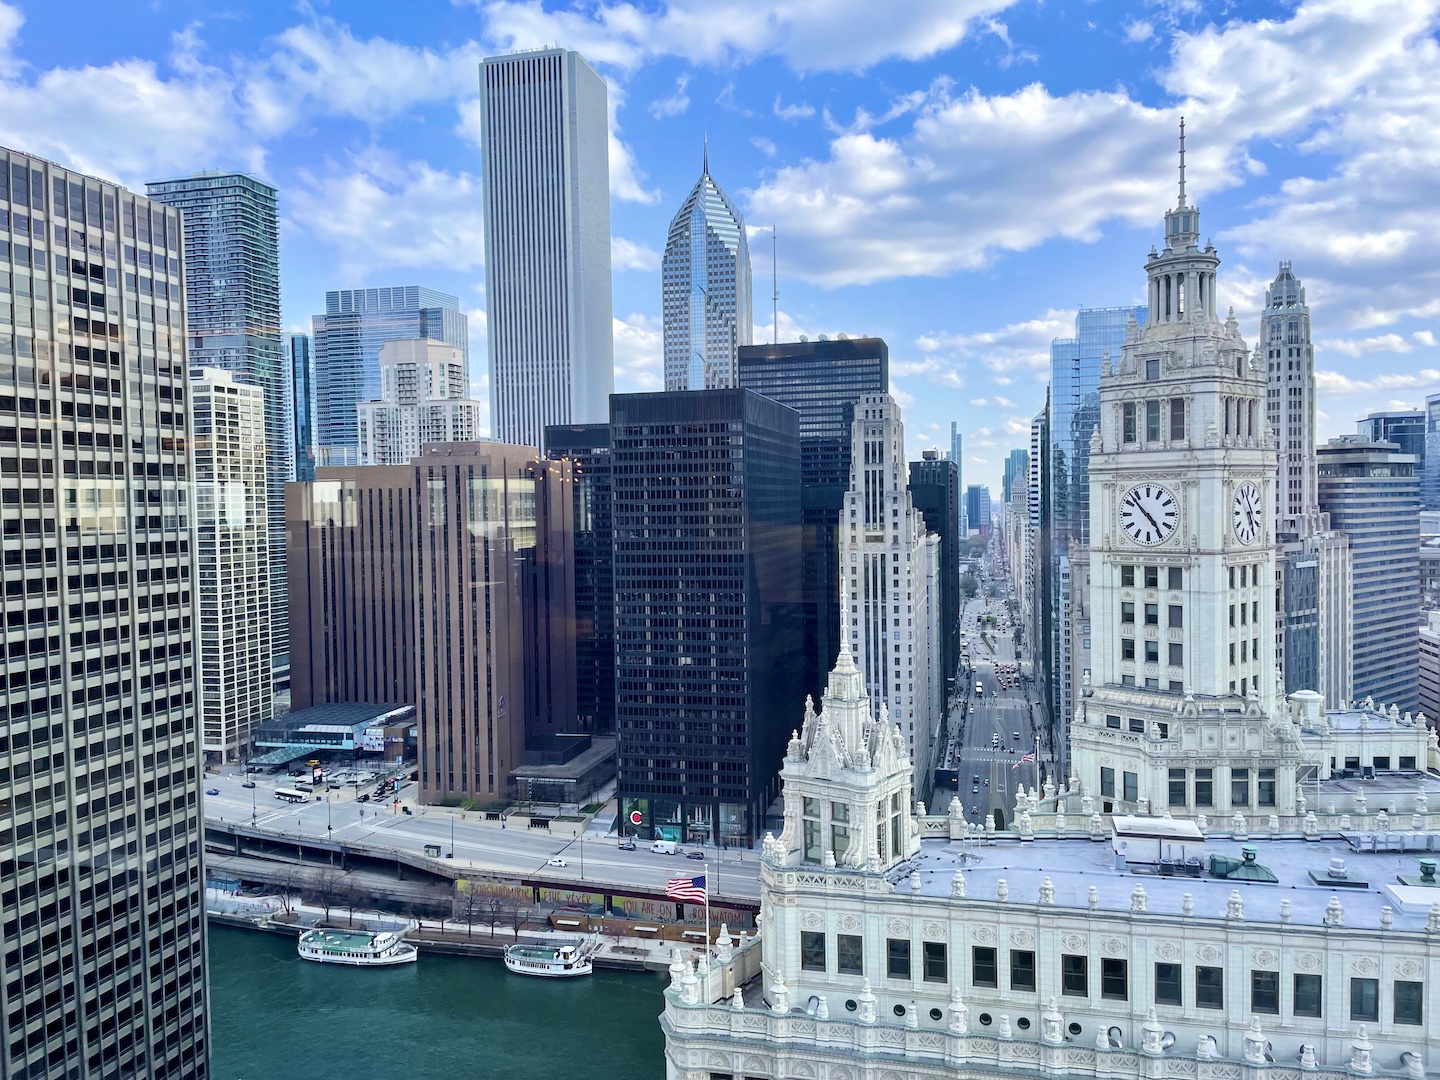 Views from oak9's new global headquarters in Chicago